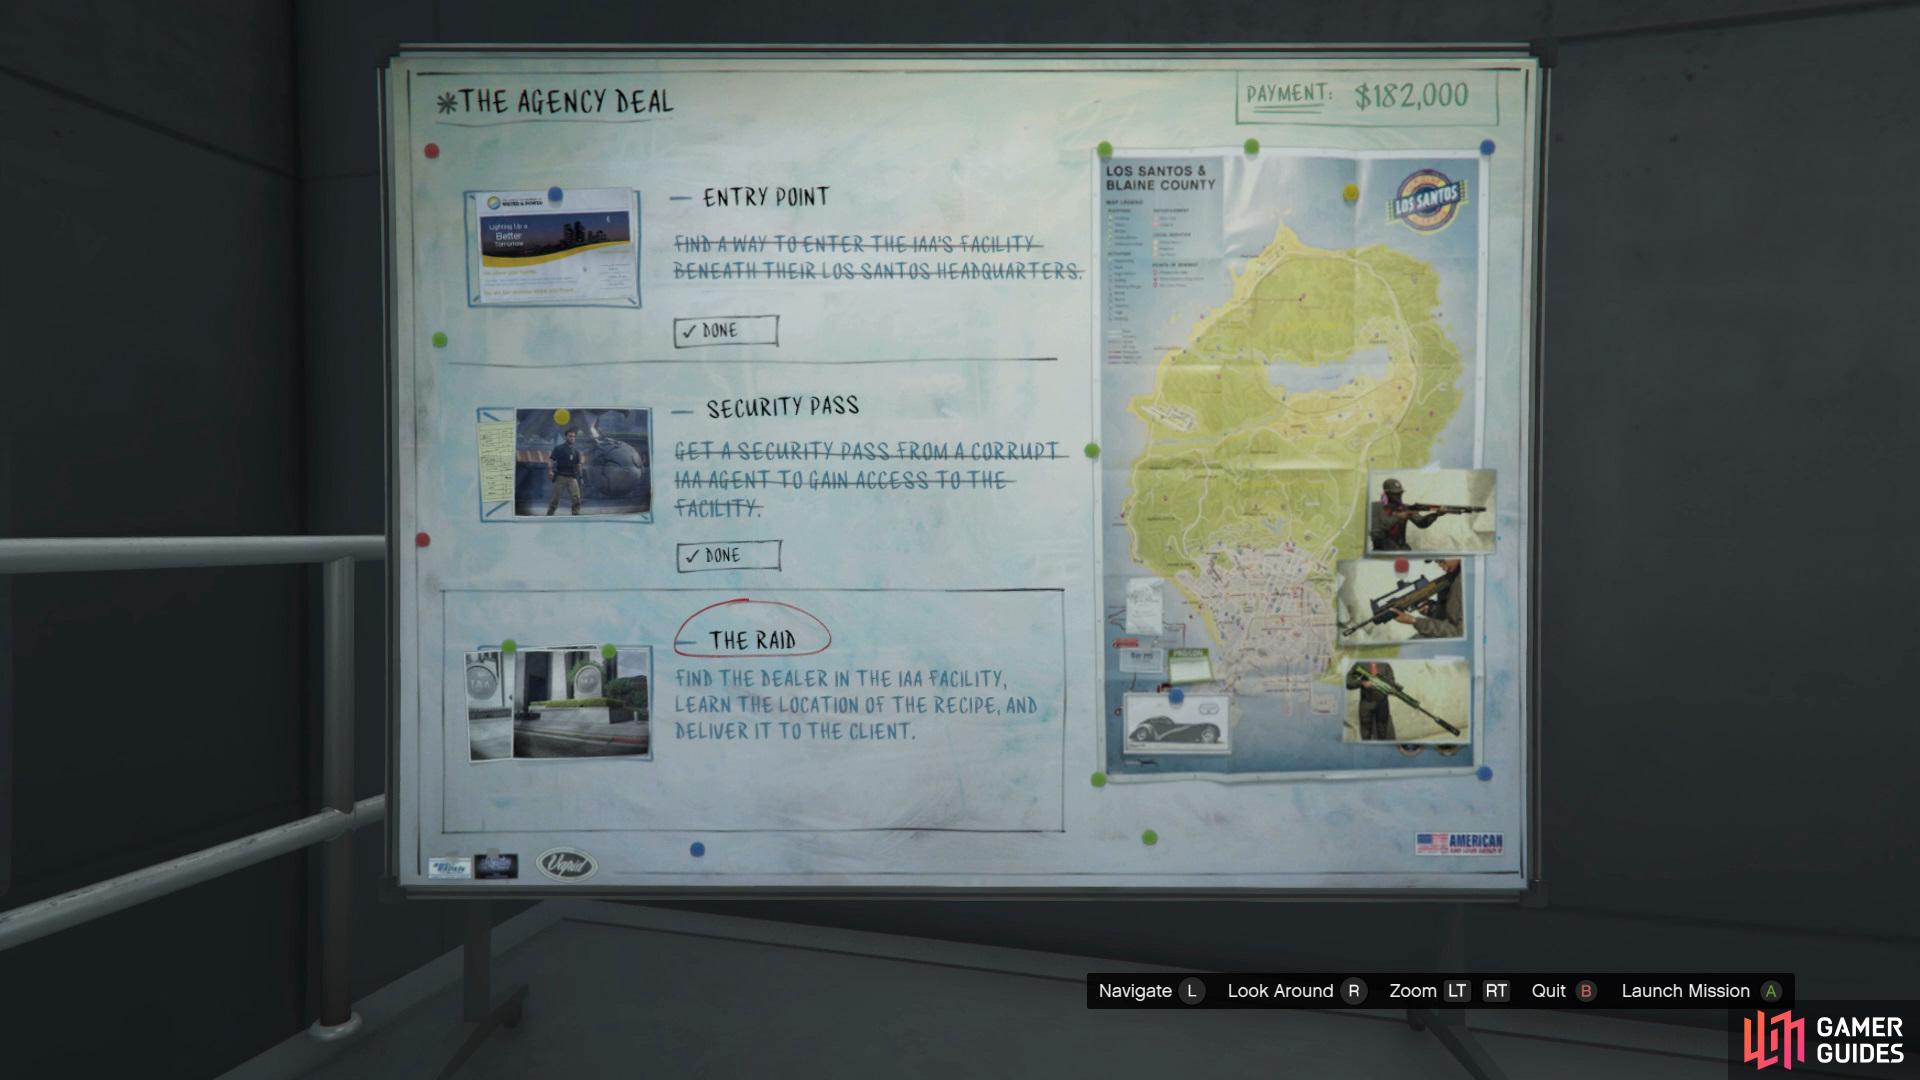 Overview of The Raid mission. 